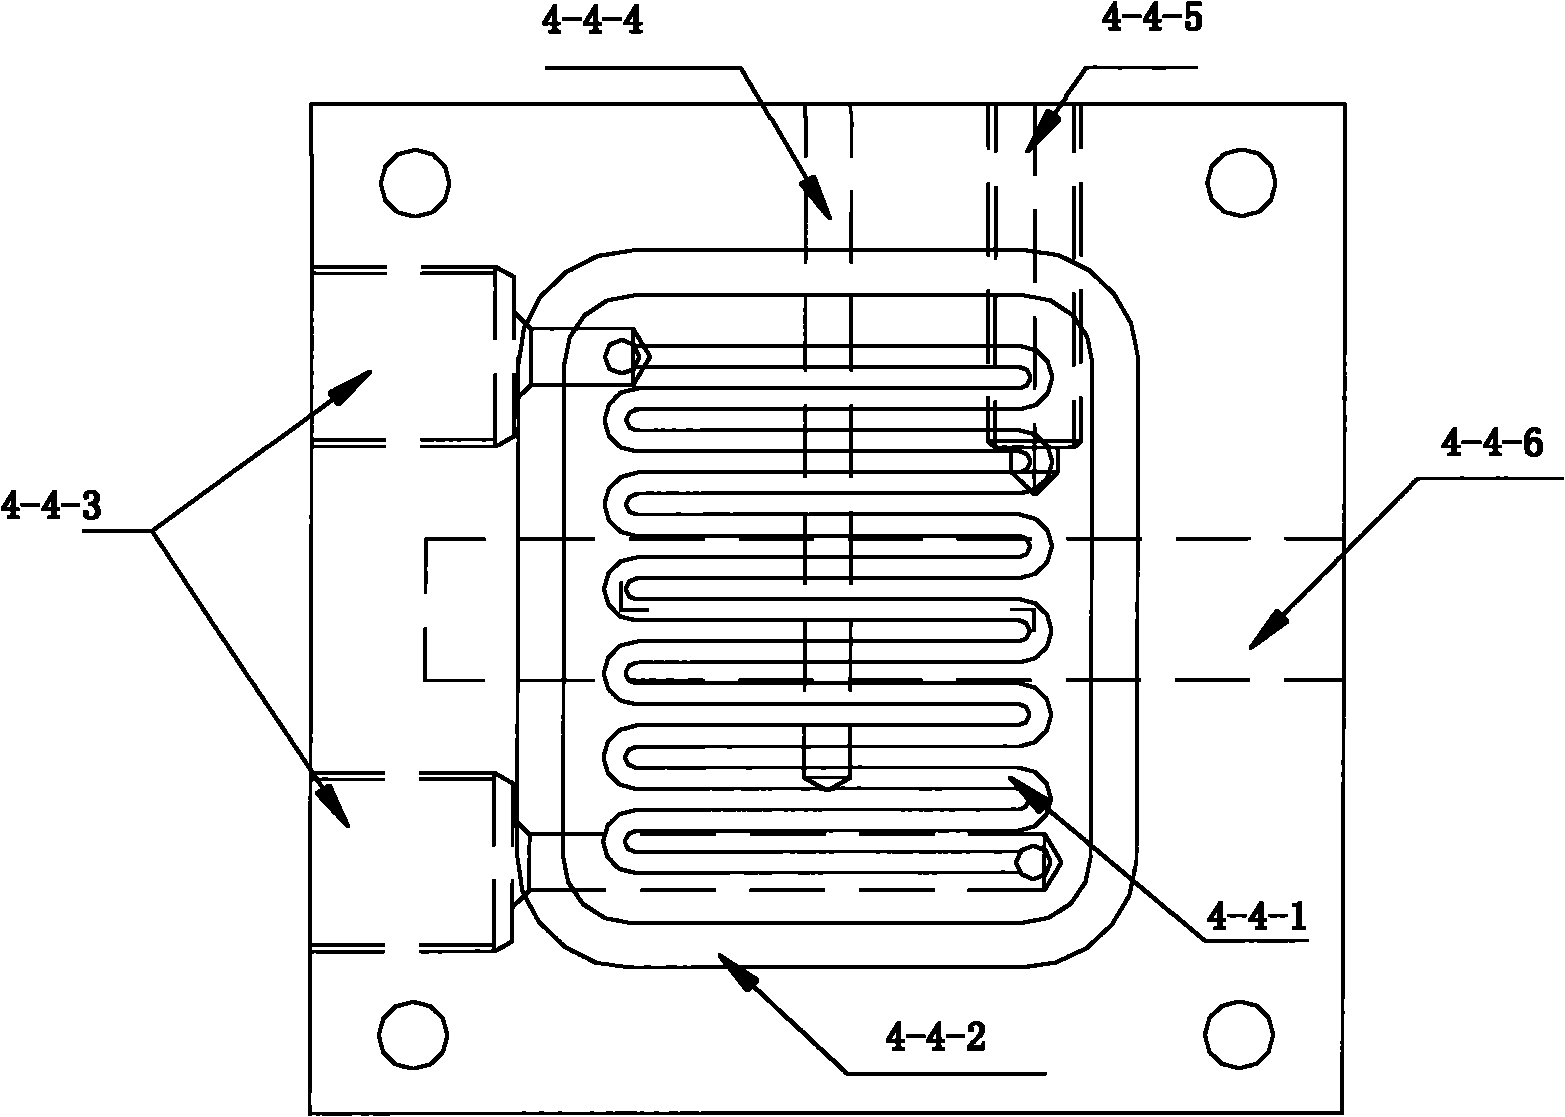 Single-cell assembly and test tool of fuel cell